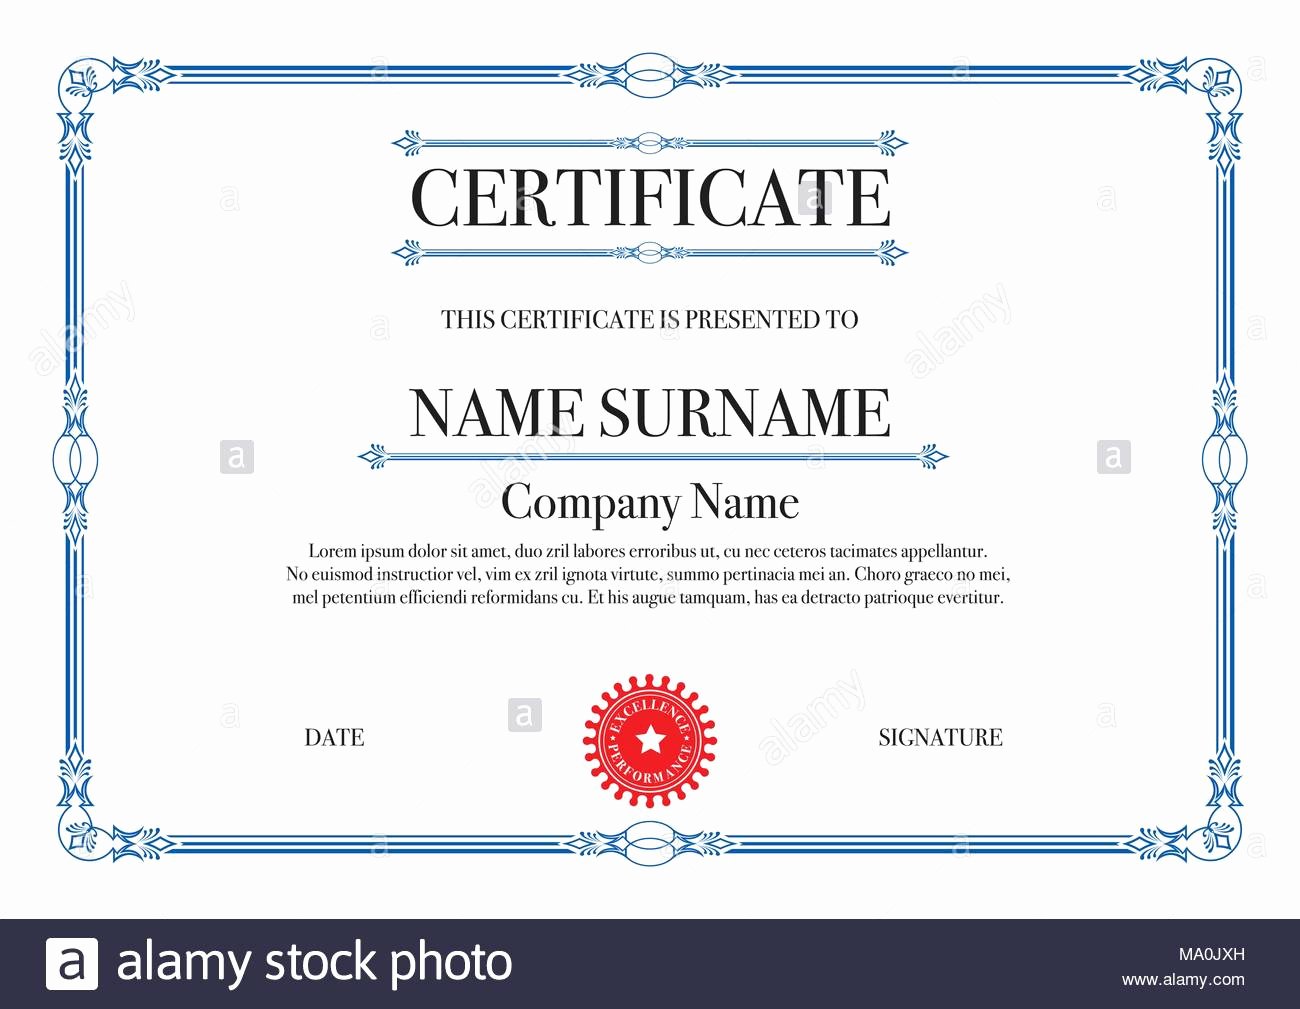 Pta Reflections Certificate Template Awesome Certificate Border Stock S &amp; Certificate Border Stock